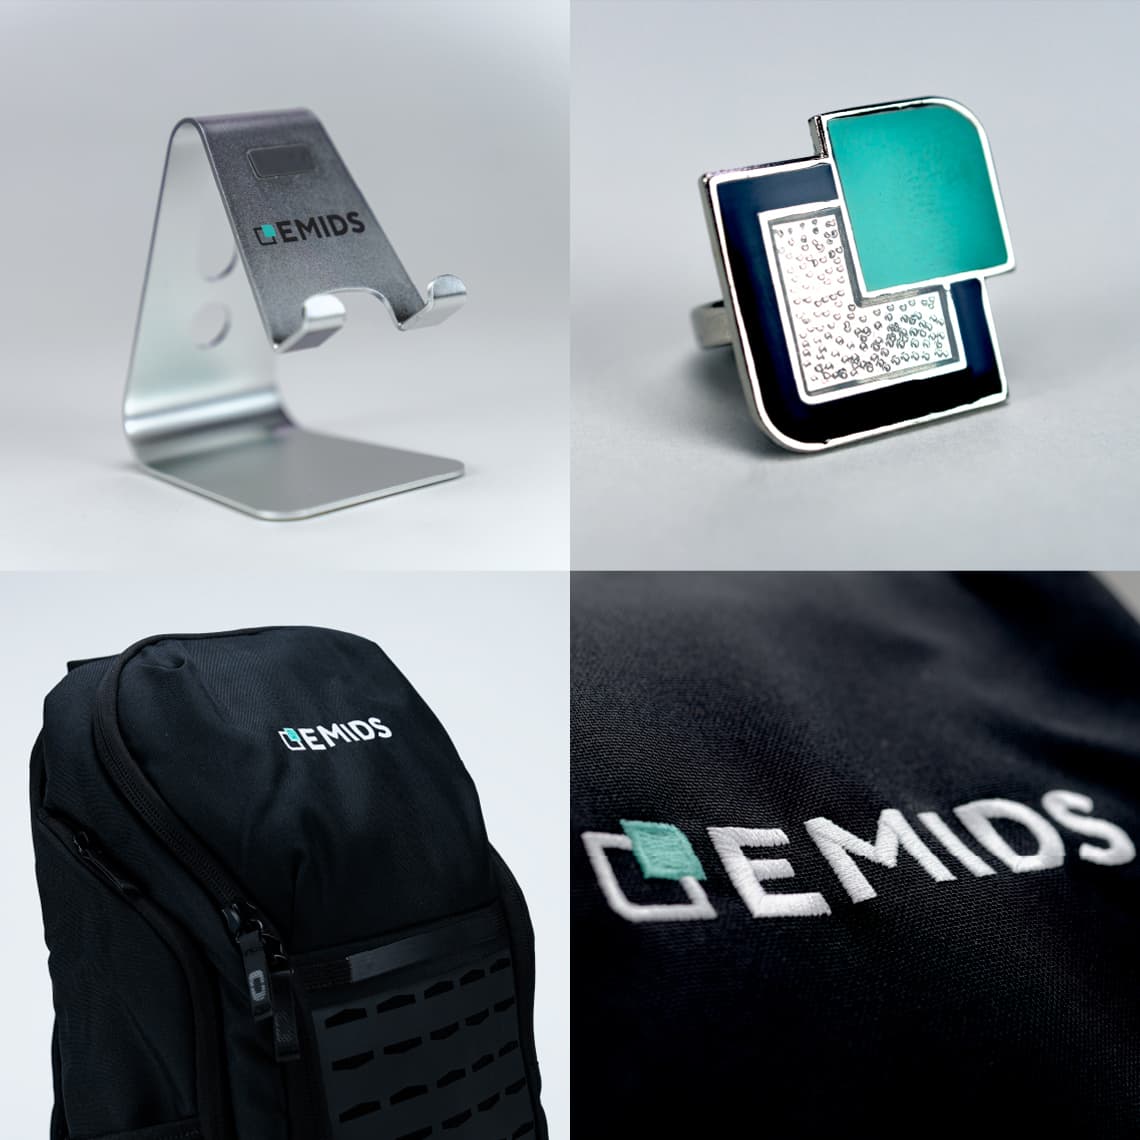 Examples of marketing materials incluiding tablet stands, pins, baseball caps and sweaters